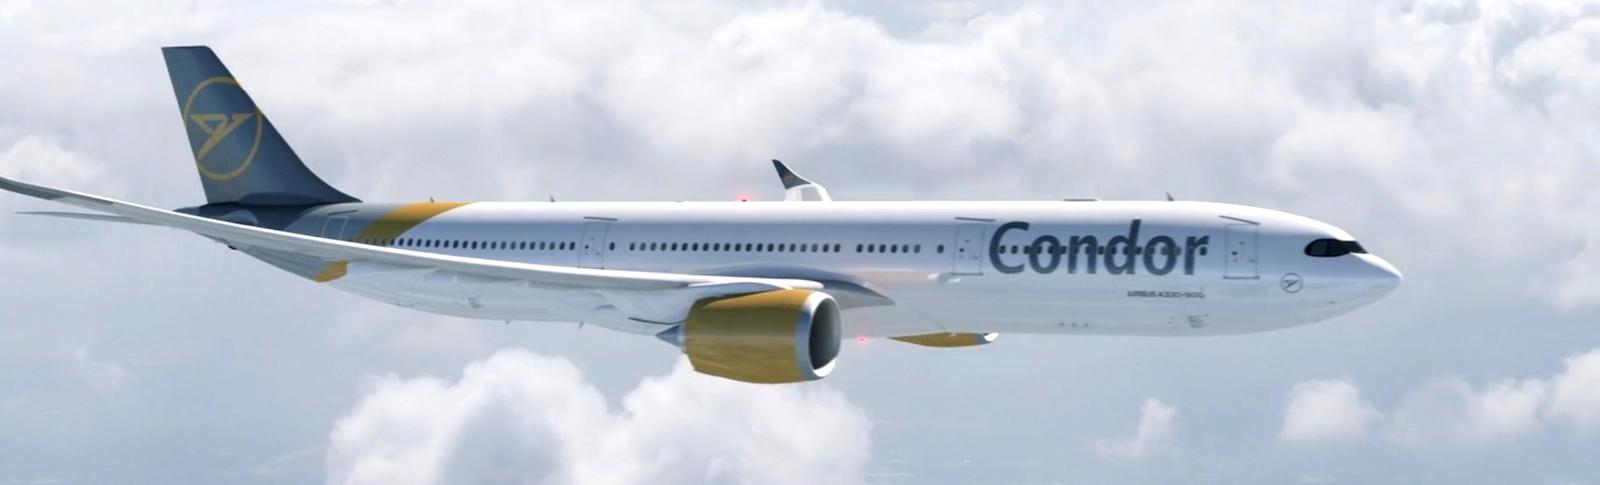 Condor orders Airbus A330-900neo - Page 2 - Airliners.net